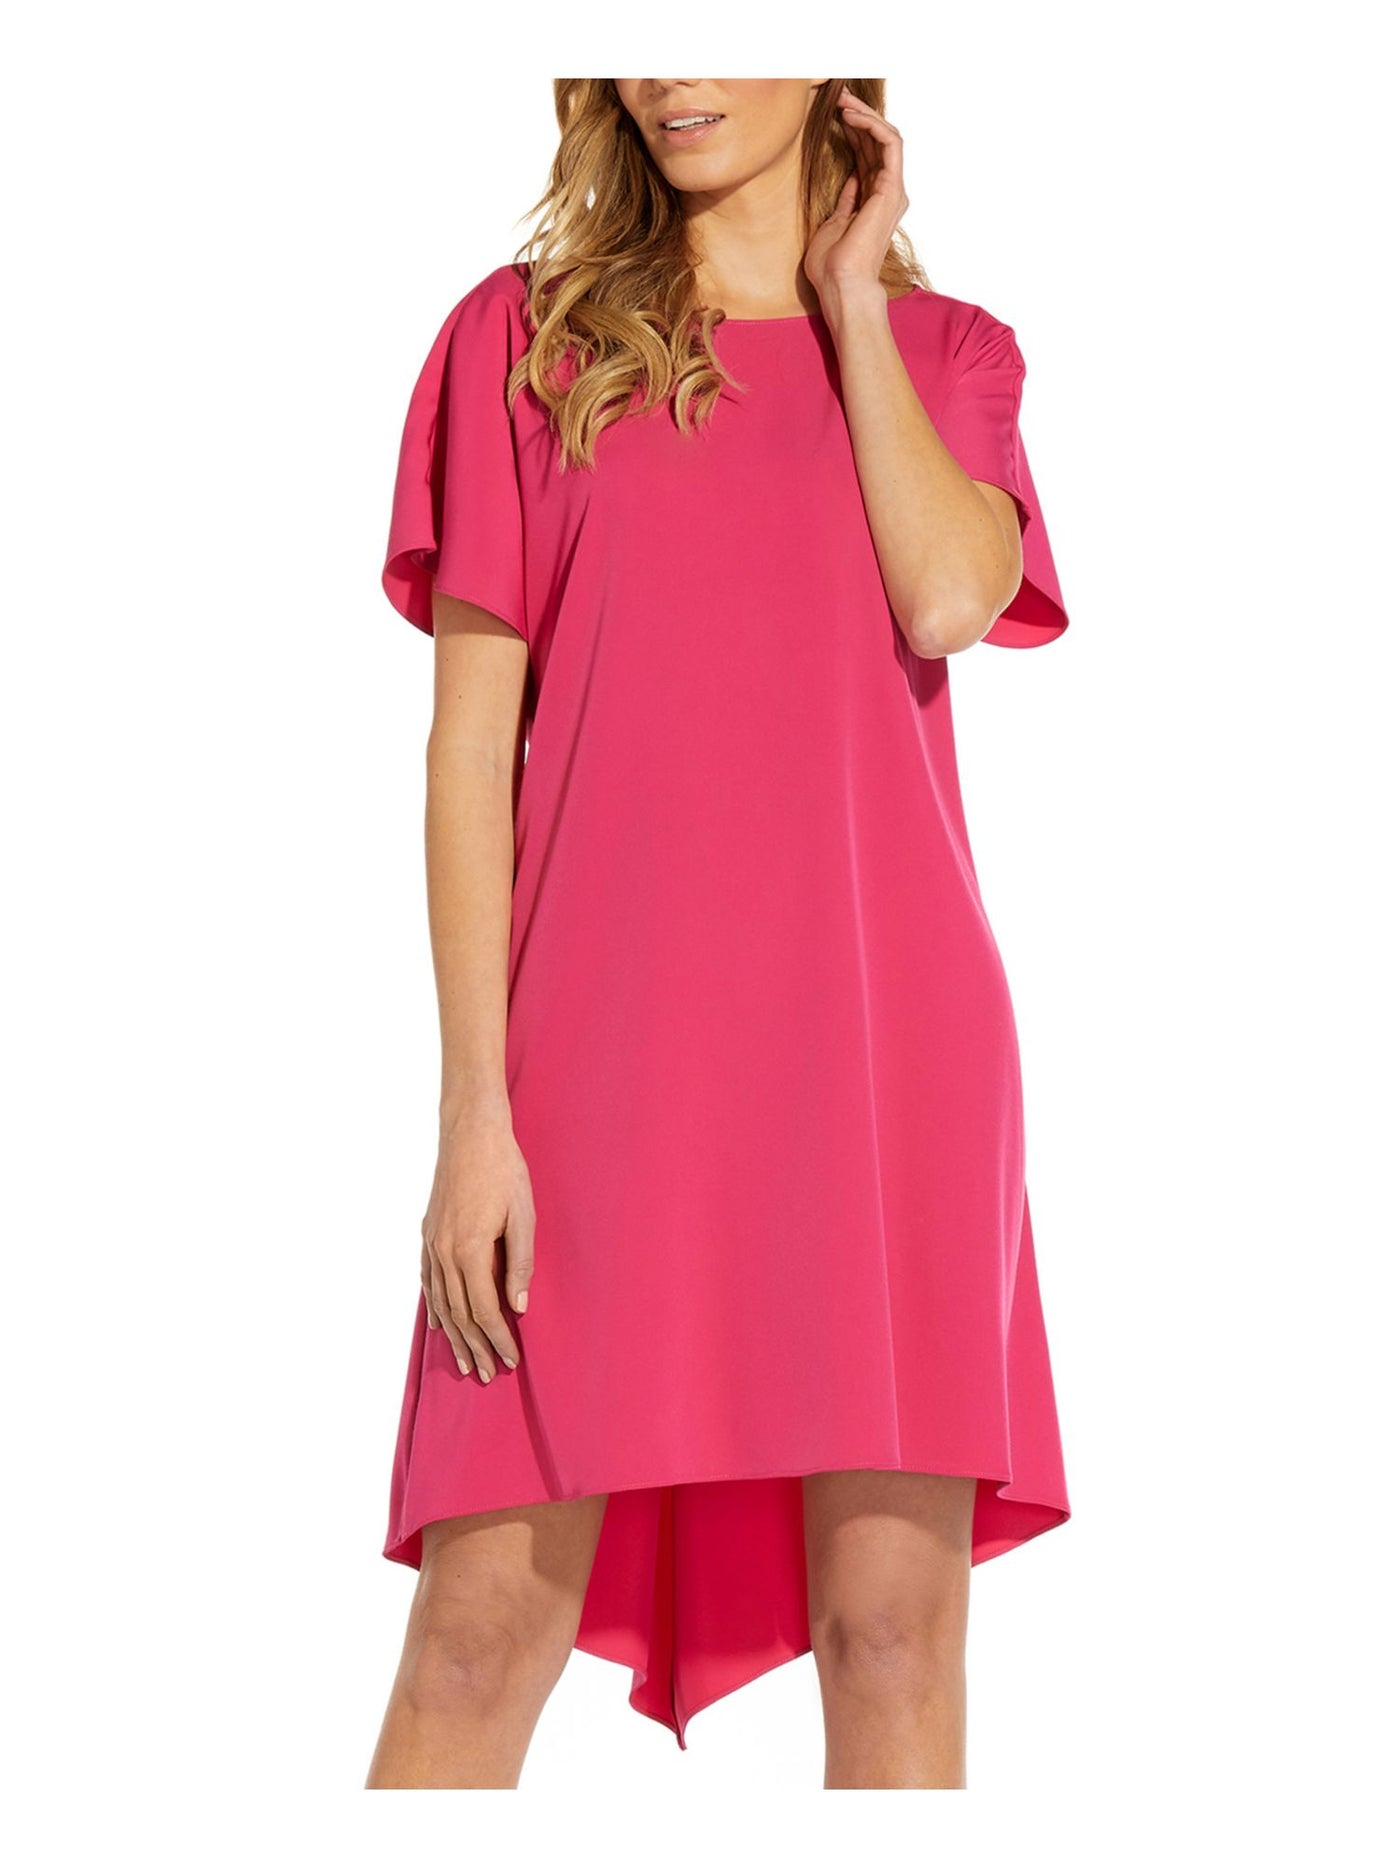 ADRIANNA PAPELL Womens Pink Short Sleeve Boat Neck Below The Knee Evening Hi-Lo Dress 0